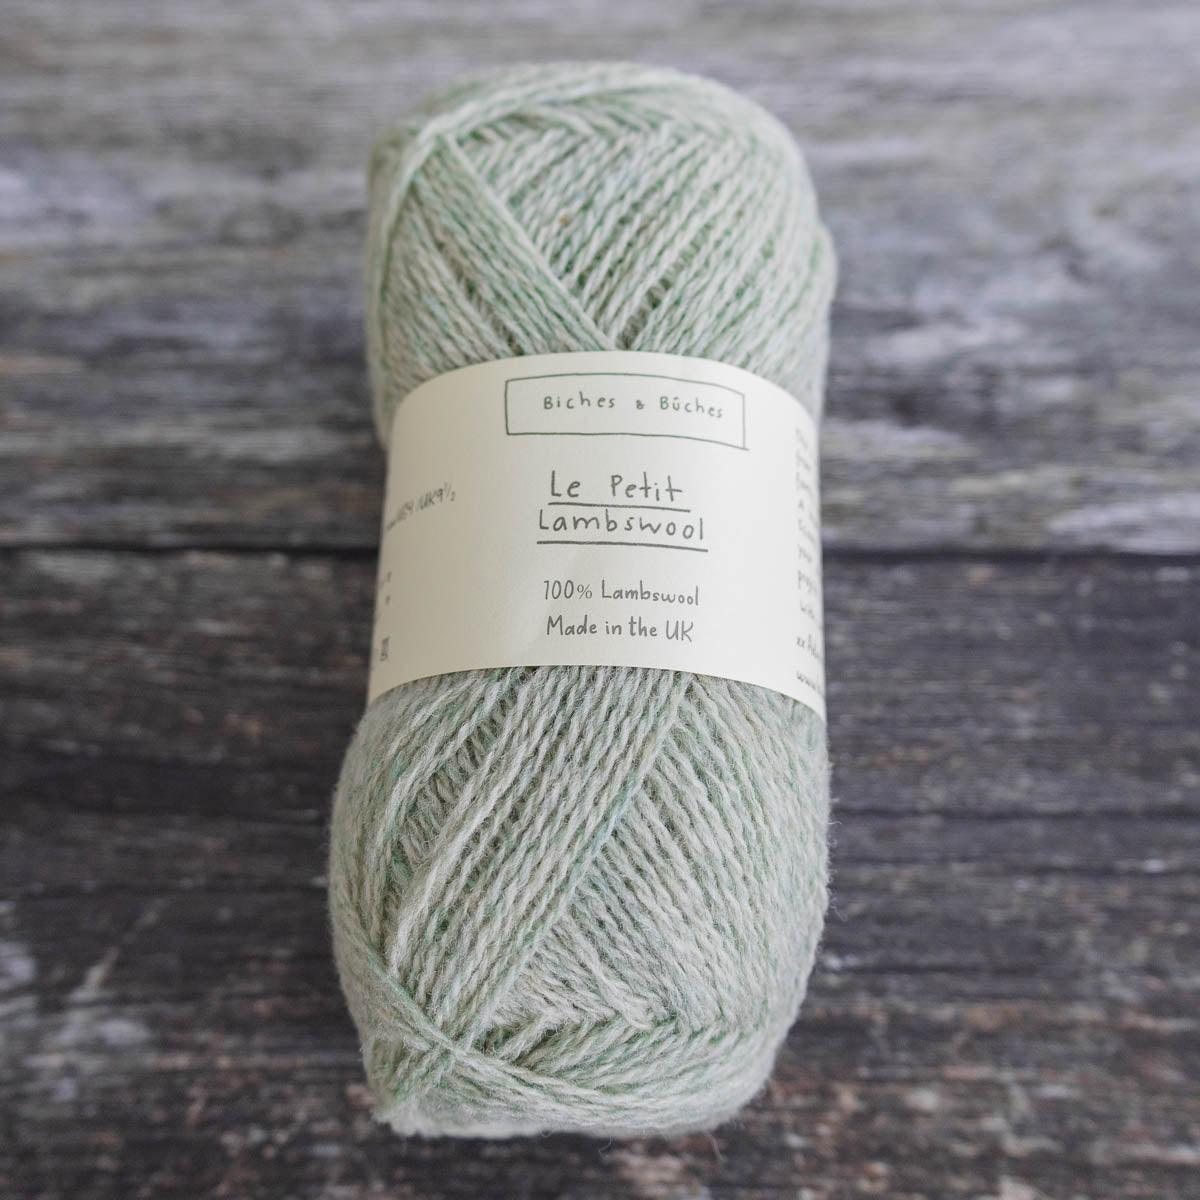 Biches & Bûches Biches & Bûches Le Petit Lambswool - Soft Green Grey - 4ply Knitting Yarn